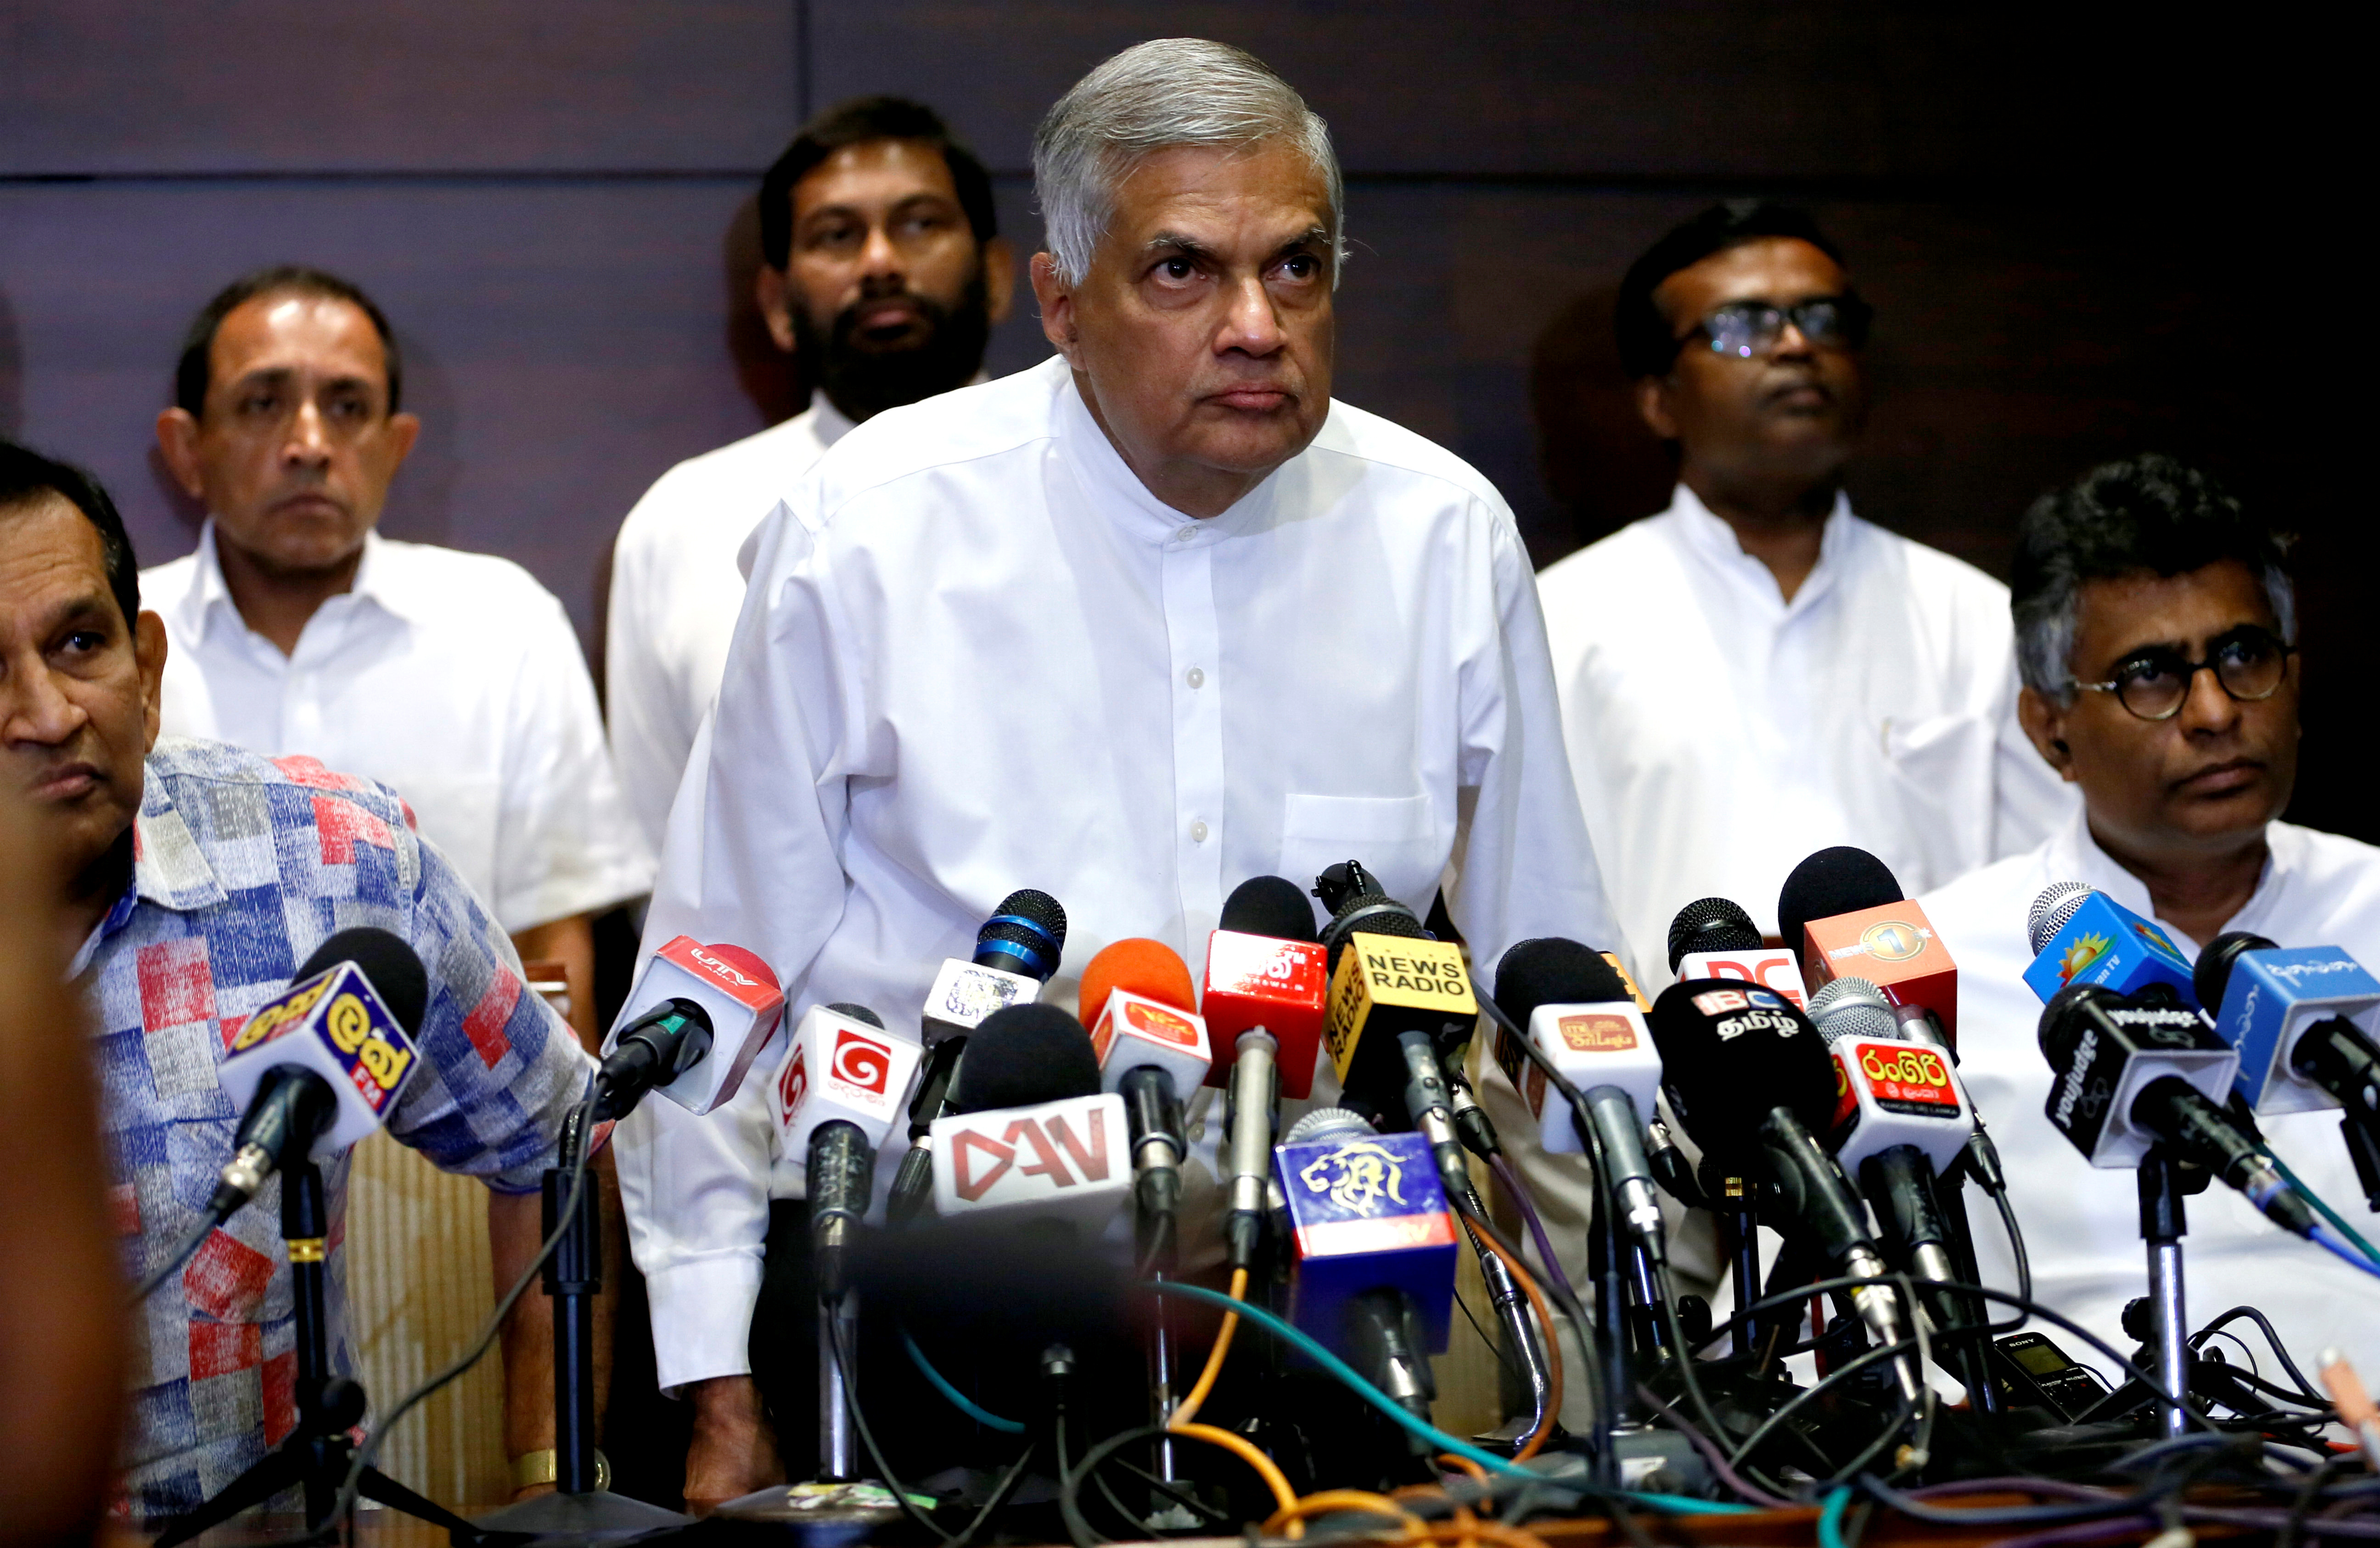 Sri Lanka's ousted Prime Minister Wickremesinghe arrives at a news conference in Colombo